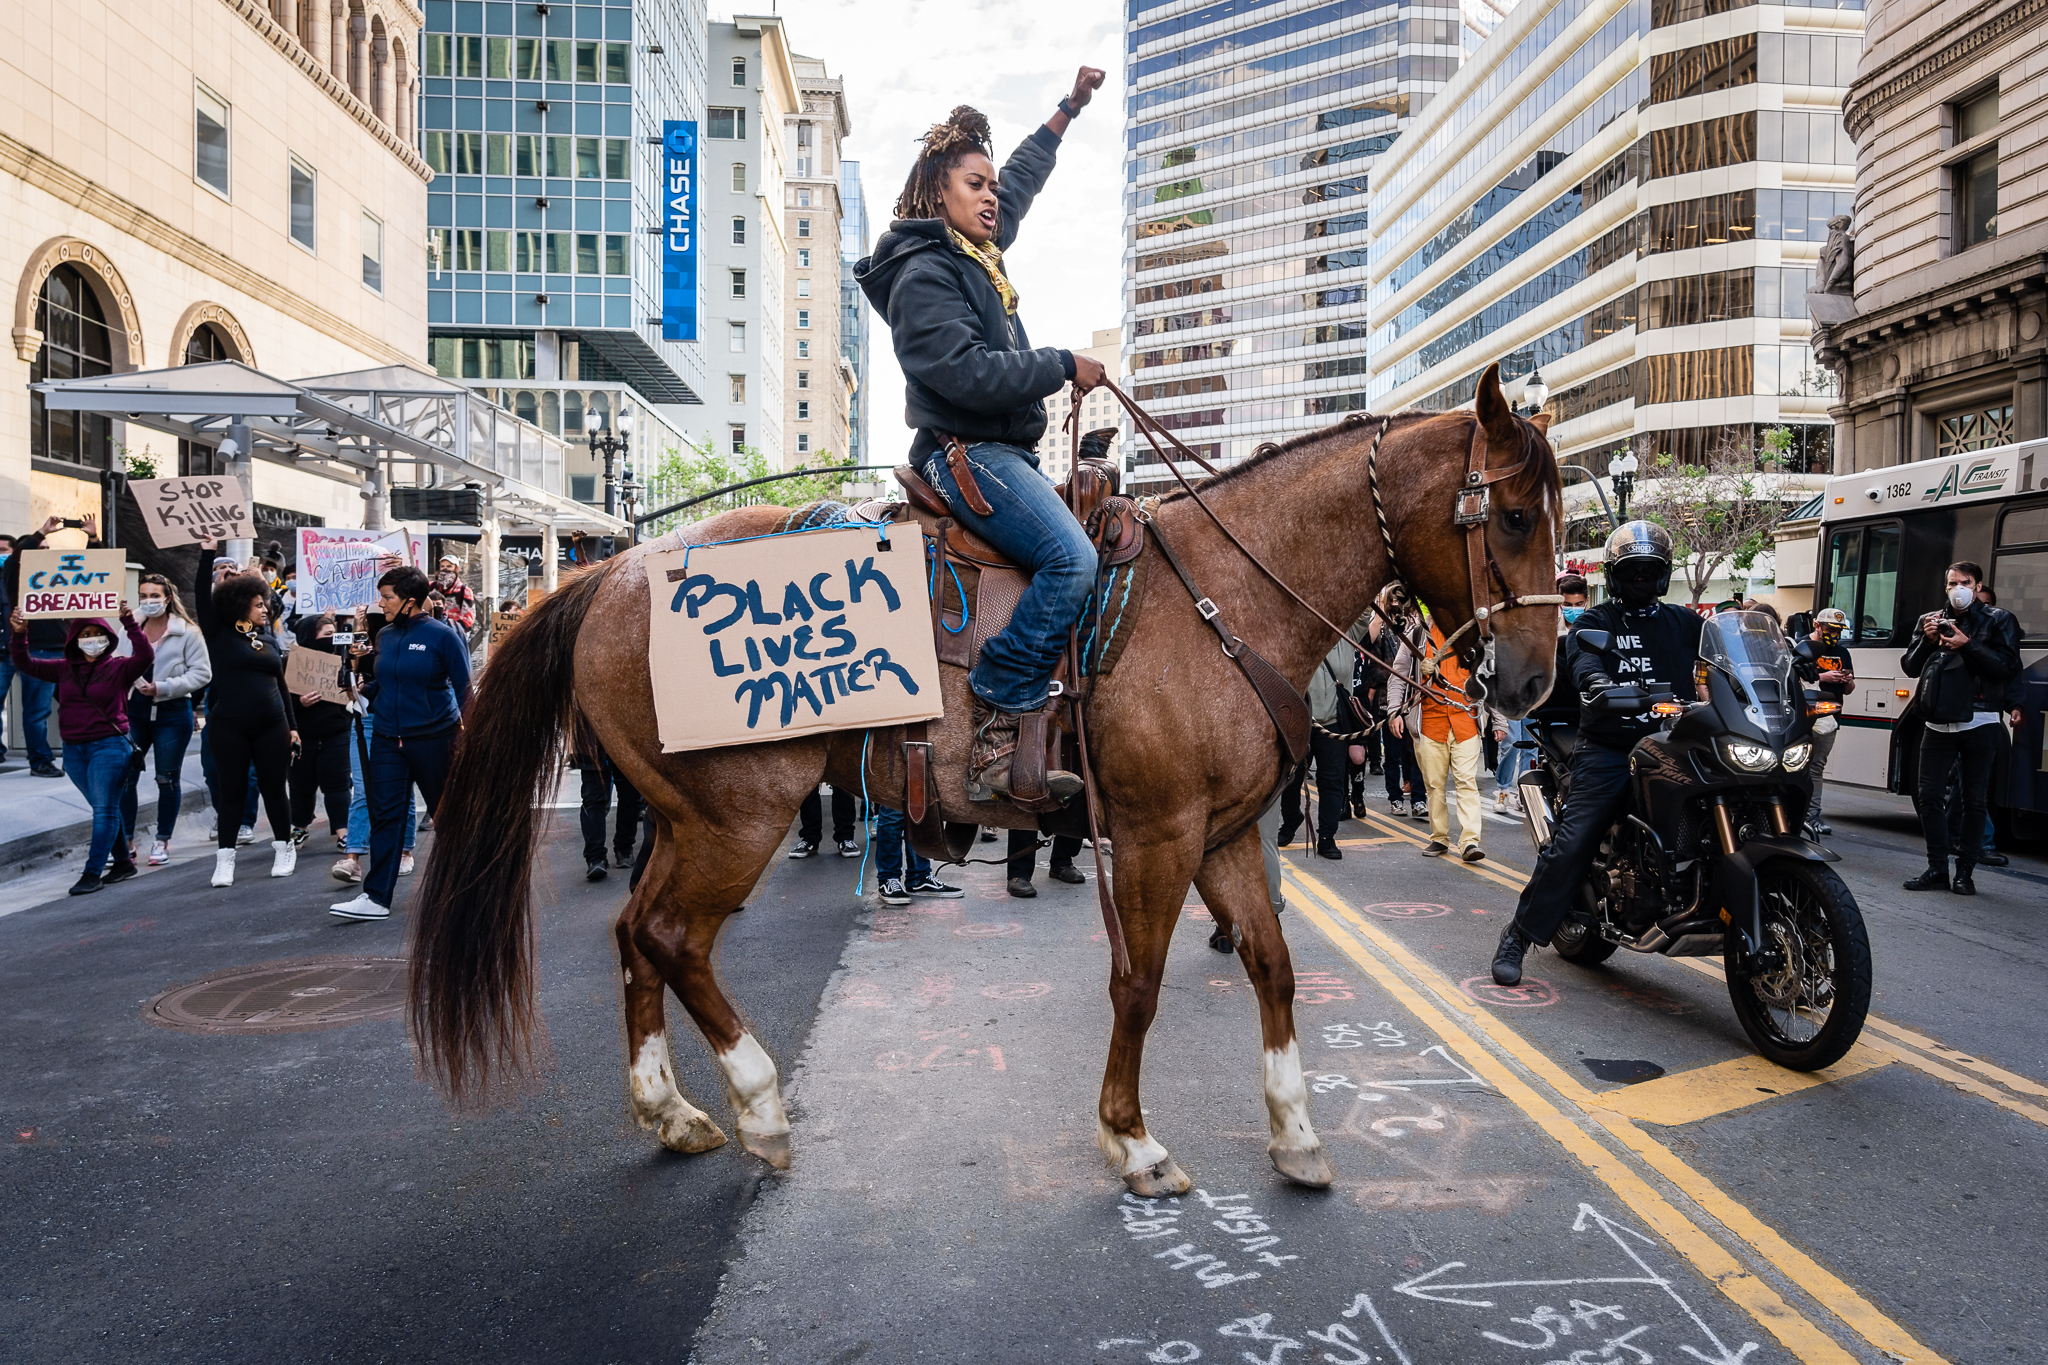 Woman on horse with Black Lives Matters sign at front of march